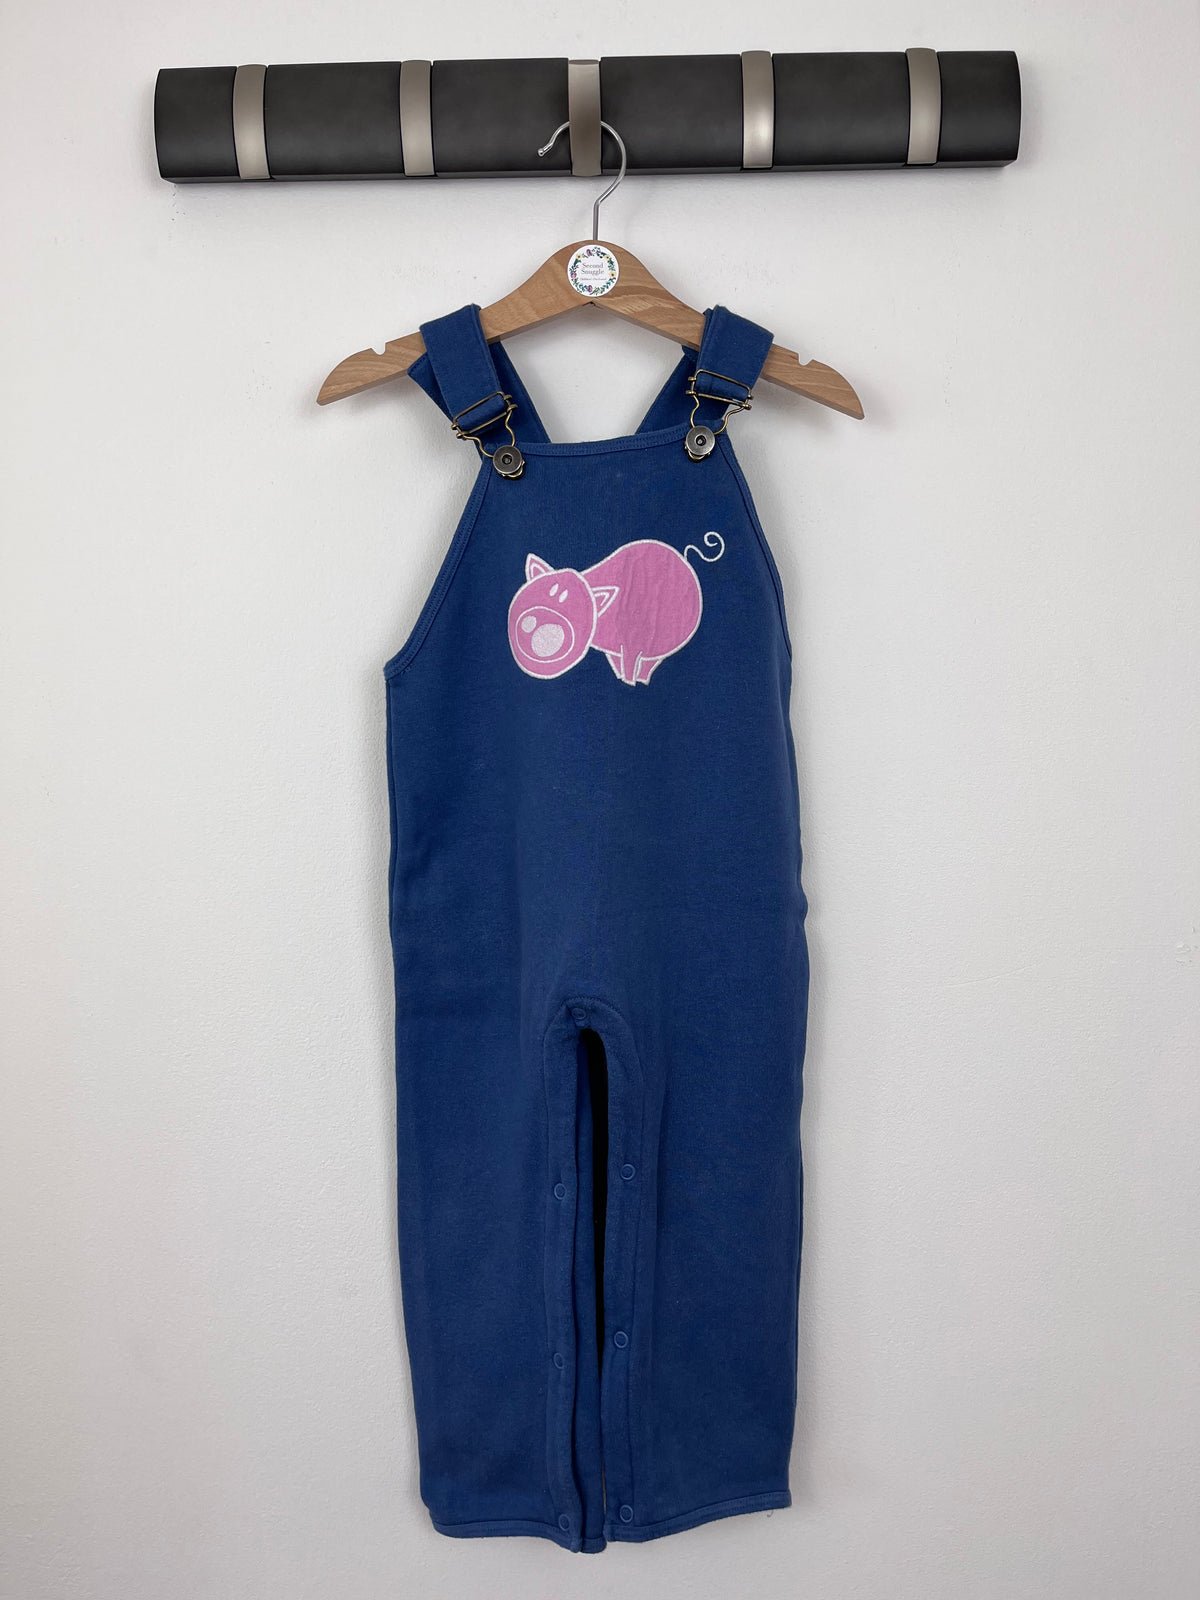 Monkey & Bob 18-24 Months-Dungarees-Second Snuggle Preloved